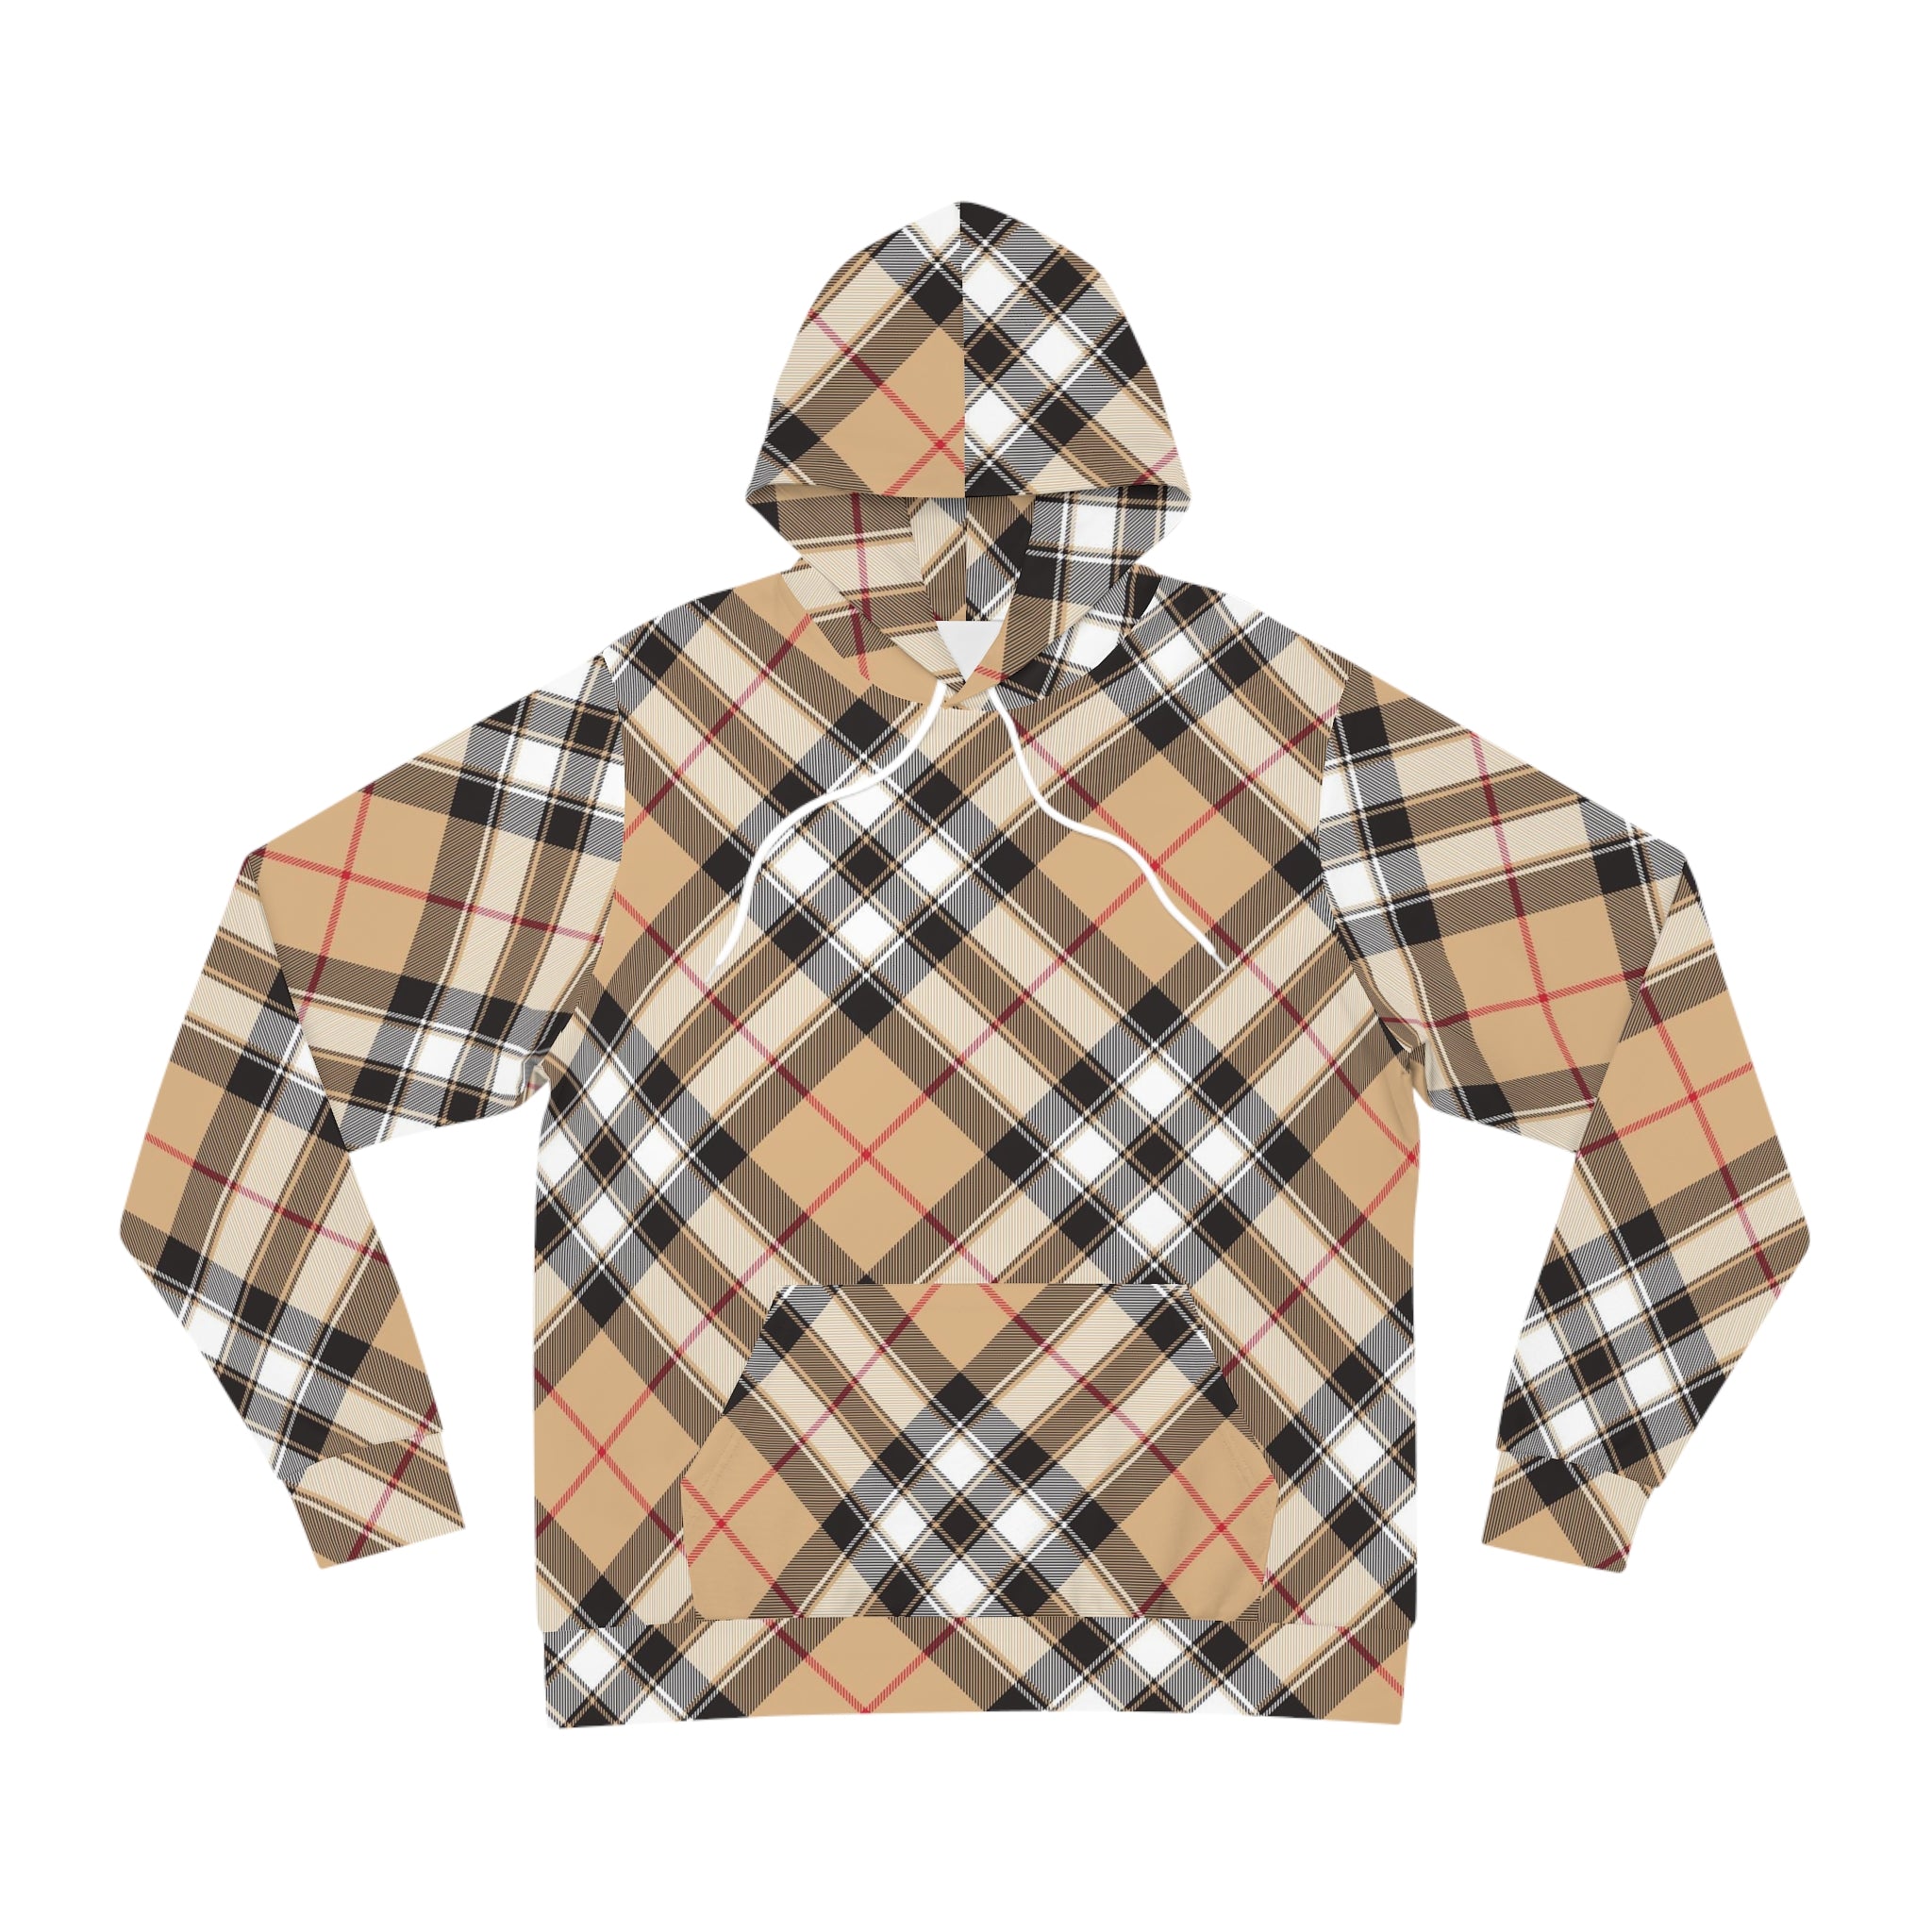  Groove Collection in Plaid (Red Line) Large Print Pullover Fashion Hoodie All Over PrintsMSeamthreadcolorautomaticallymatchedtodesign